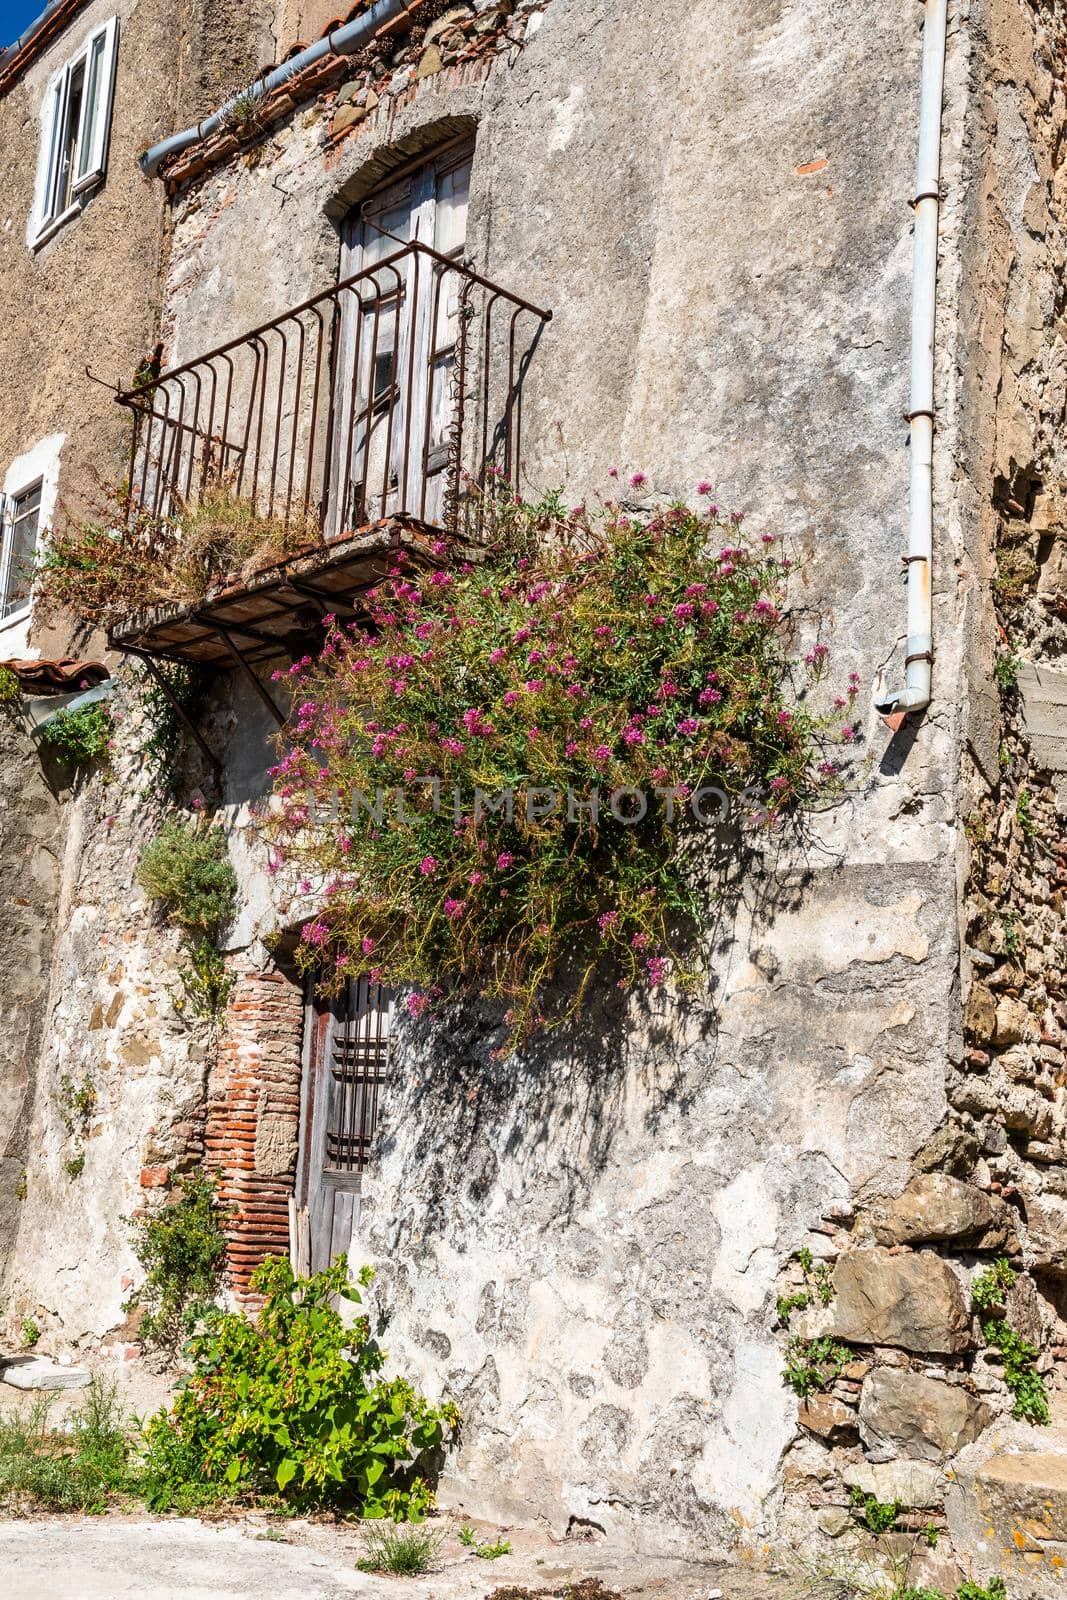 Old rural houses of San Fratello village, Sicily, Italy by mauricallari